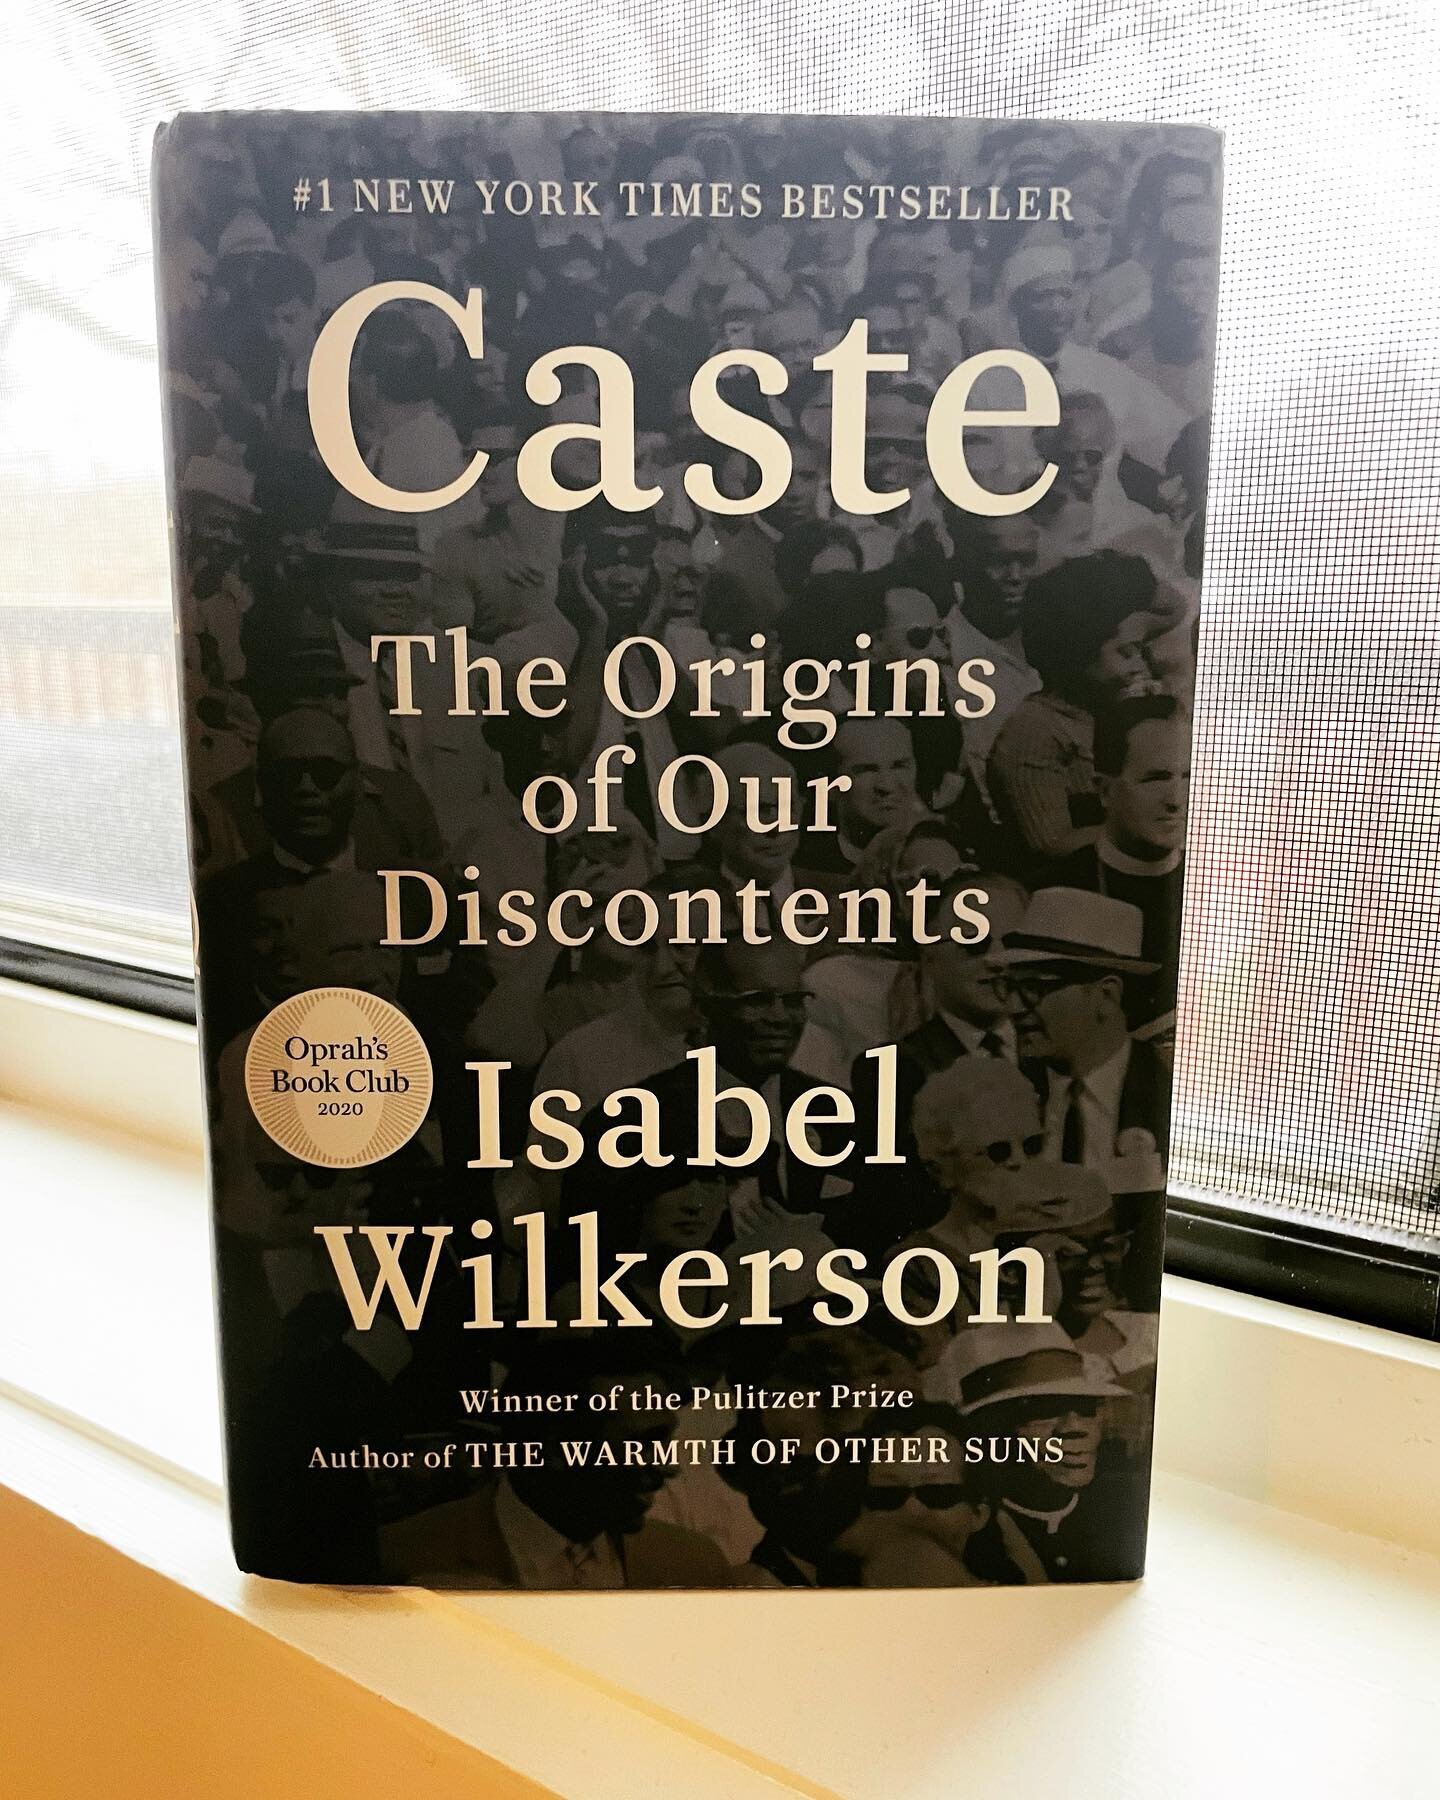 Just finished listening to the audio version of Caste by @isabelwilkerson after reading the book this past summer. I found the book so valuable that I wanted to listen to it in case I missed any of the gems this book dropped. 

This is a must read fo